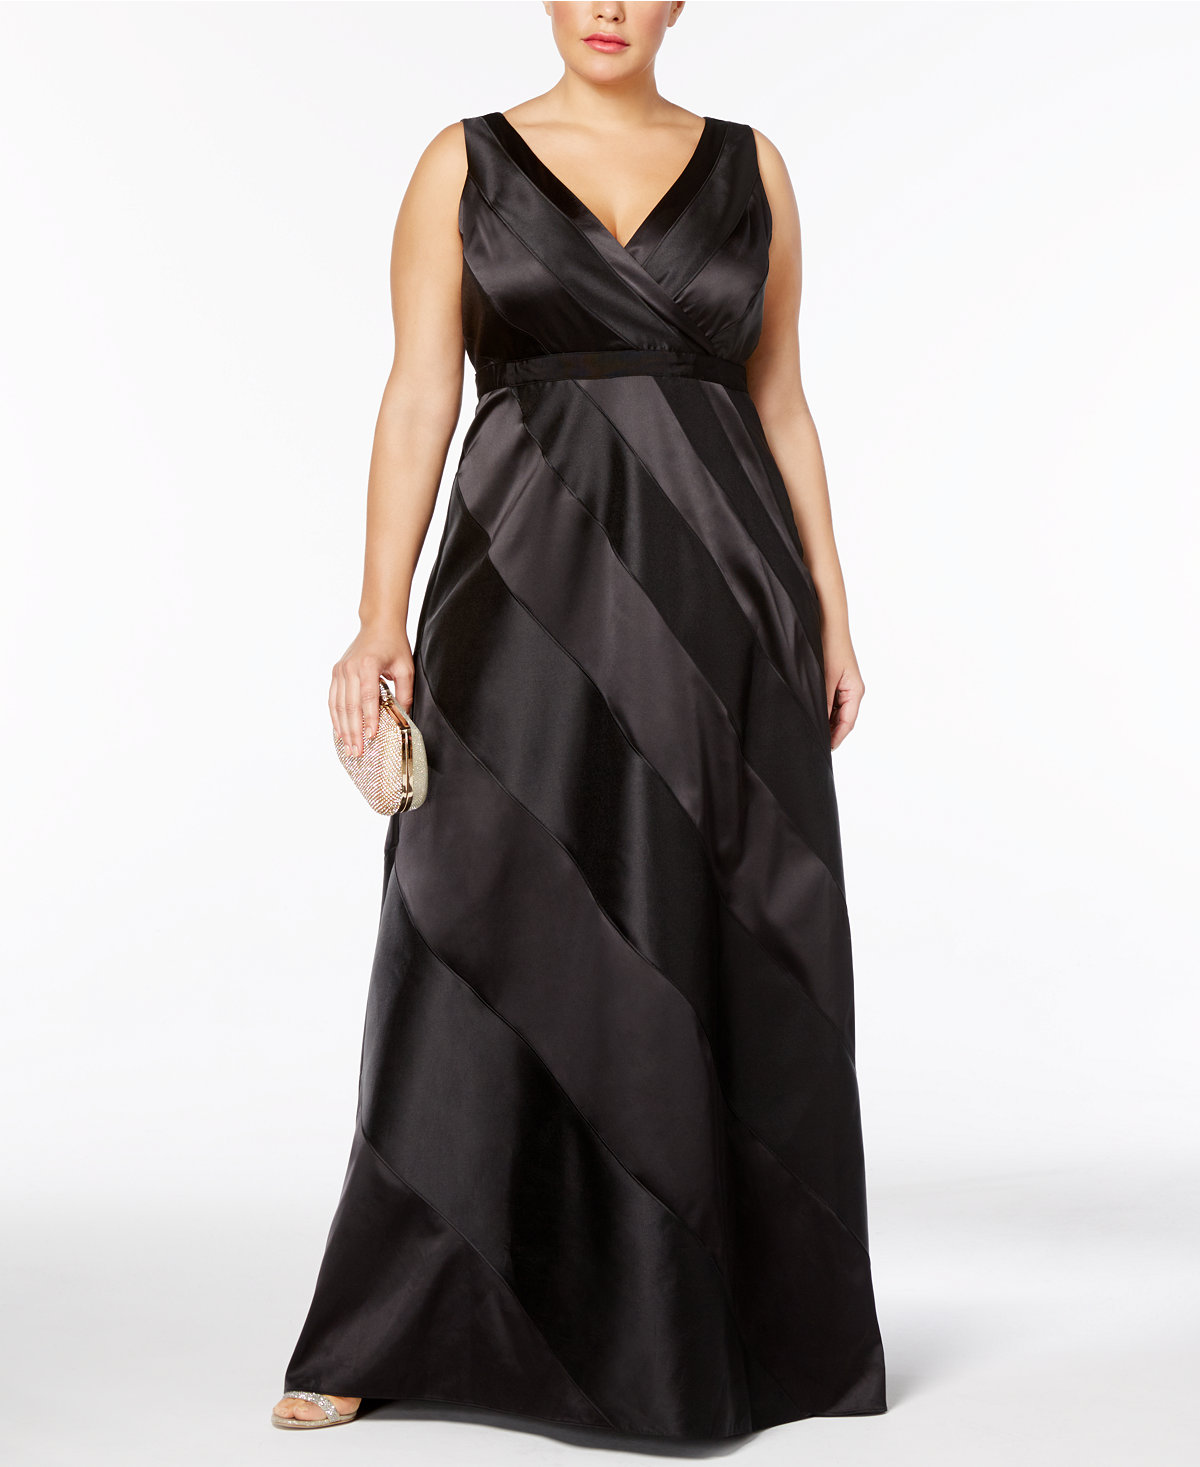 https://www.macys.com/shop/product/adrianna-papell-plus-size-satin-striped-ball-gown?ID=5237134&CategoryID=37038#fn=sp%3D6%26spc%3D1100%26ruleId%3D87%7CBOOST%20SAVED%20SET%7CBOOST%20ATTRIBUTE%26searchPass%3DmatchNone%26slotId%3D46